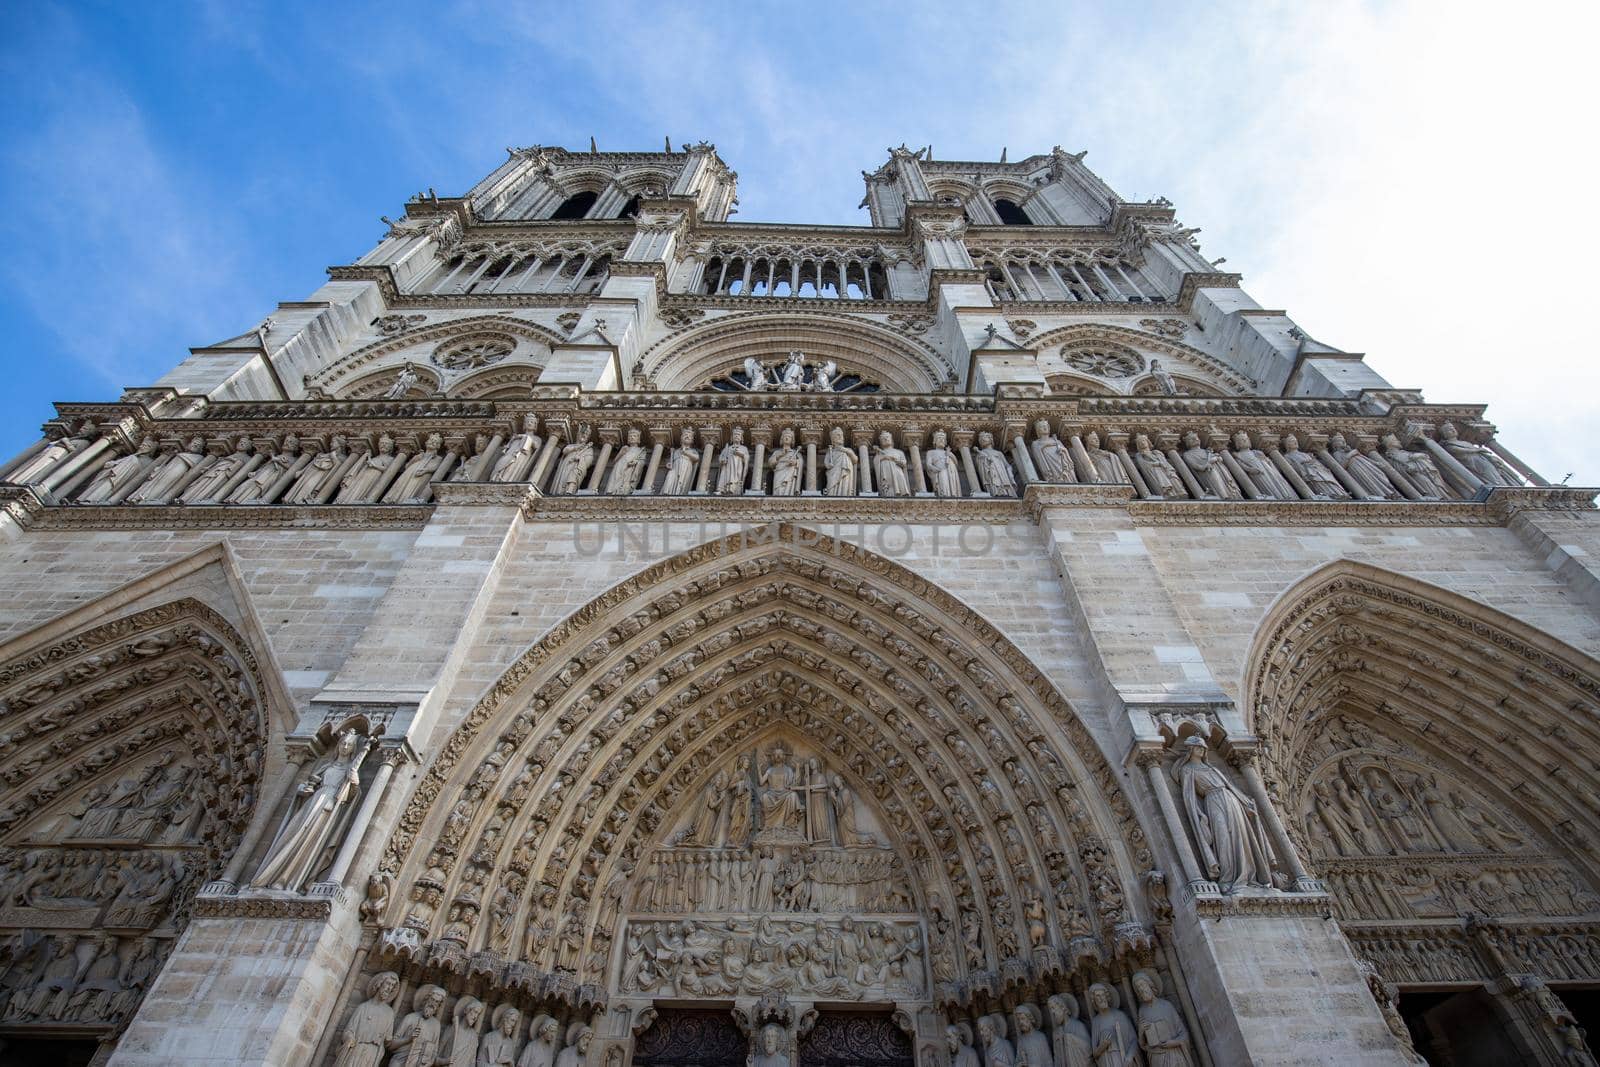 The front with two main towers of cathedral Notre Dame, Paris, France